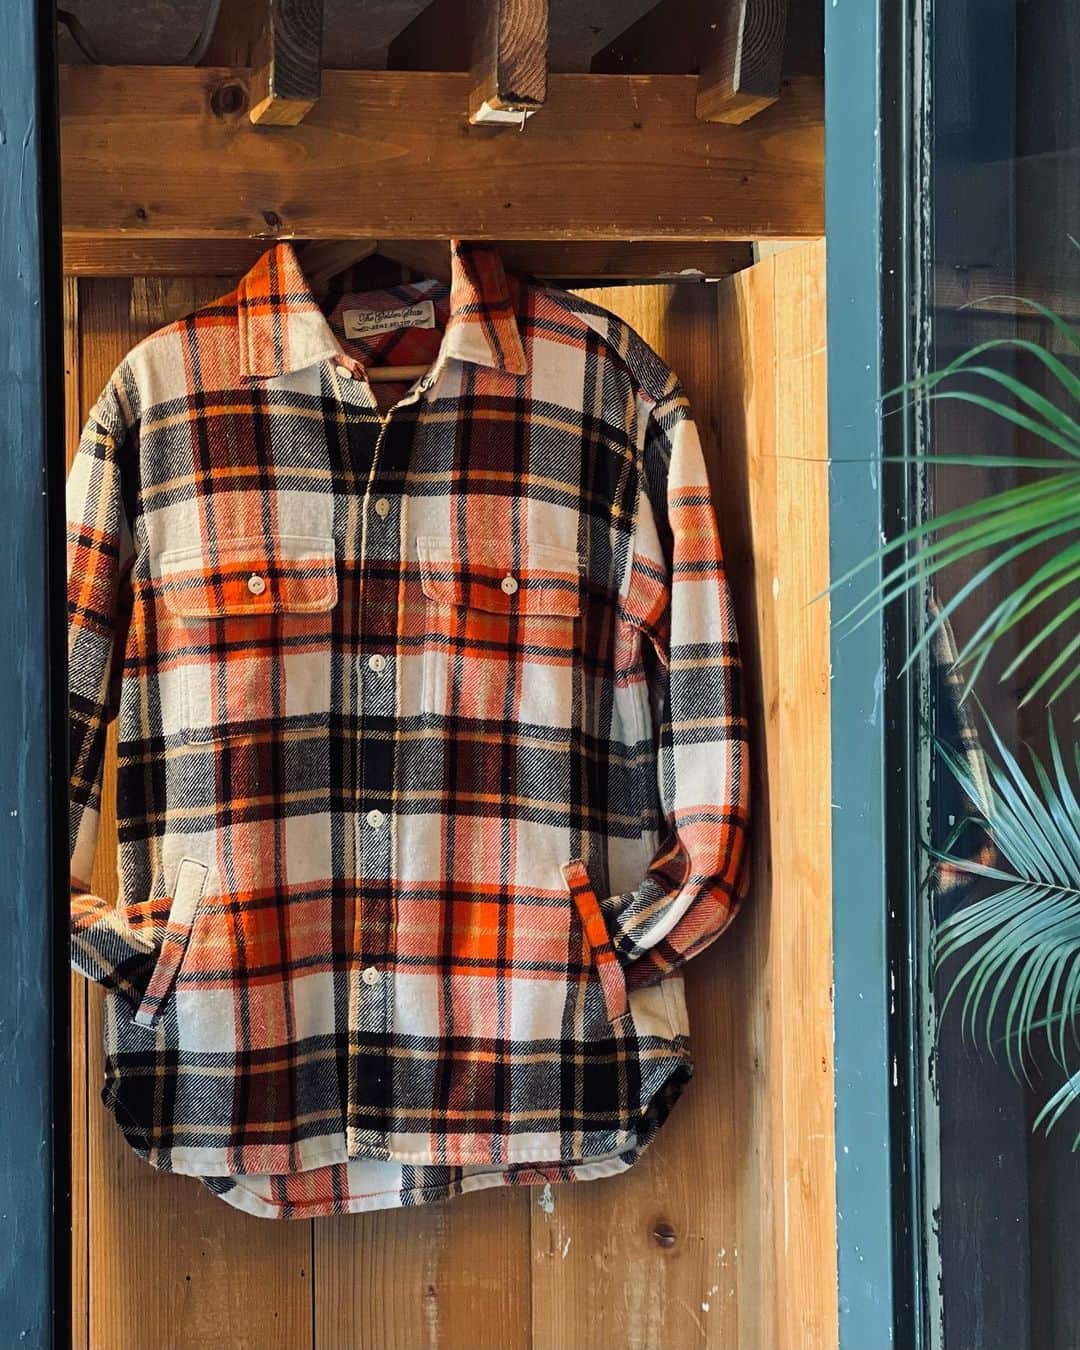 BEAMS+のインスタグラム：「・  BEAMS PLUS RECOMMEND  REMI RELIEF × BEAMS PLUS  "C.P.O CHECK SHIRT ."  Check shirt with a warm look. Cotton and polyester material is used to create a classic look. Four pockets on the front and a relaxed fitting allow the shirt to be worn like a blouson.  -------------------------------------  暖かみのある表情のチェックシャツ。コットン×ポリエステルの素材を使用しクラシックな風合いに仕上げました。フロントには4つのポケットを配し、リラックスしたフィッティングの為ブルゾンライクに着用が可能に。   #beams #beamsplus #beamsplusharajuku  #mensfashion #remirelief」